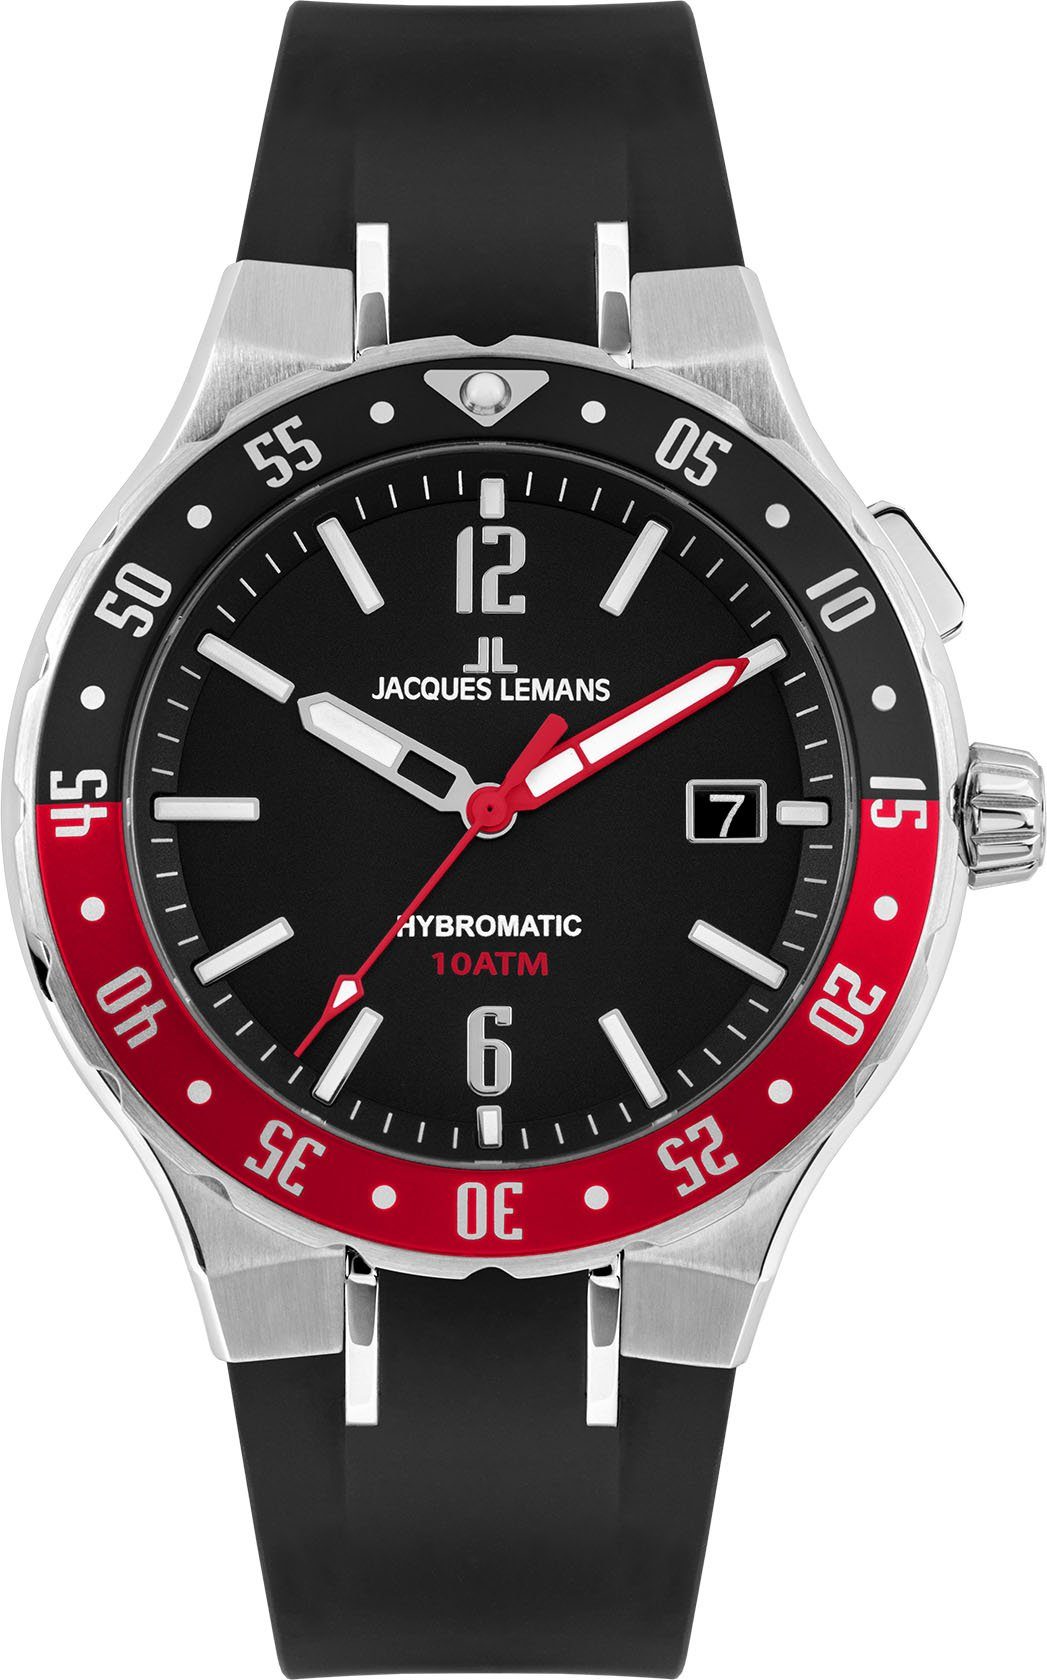 Jacques Lemans Kineticuhr Hybromatic, 1-2109A rot, schwarz